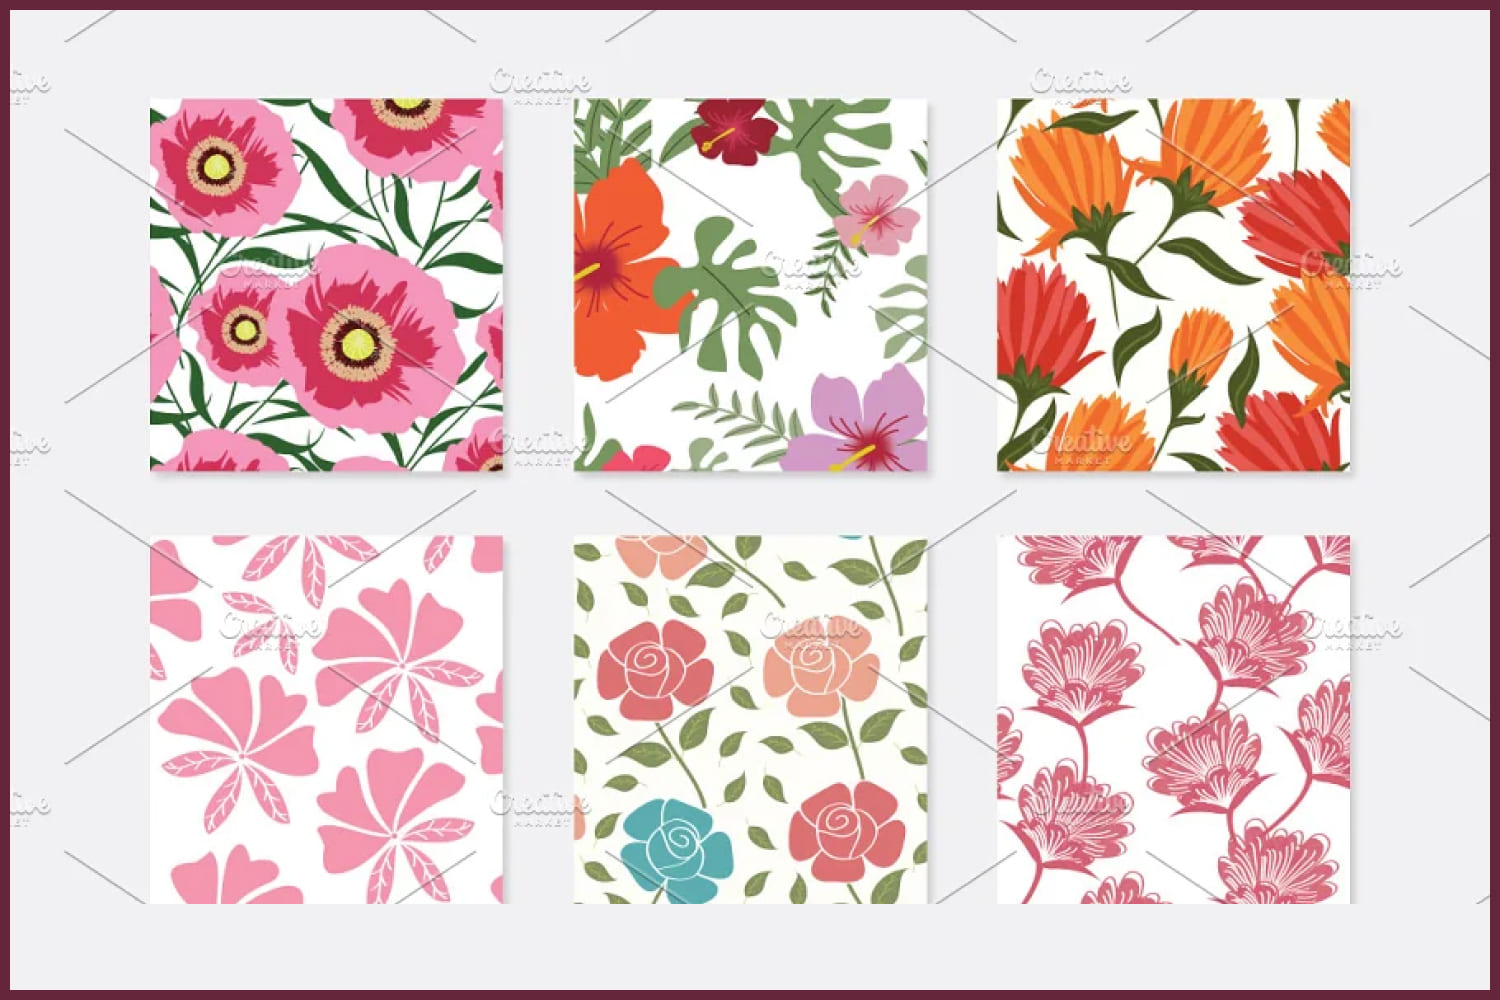 Colorful Vibrant Ditsy Floral  Free Vector Arts & Images - WowPatterns